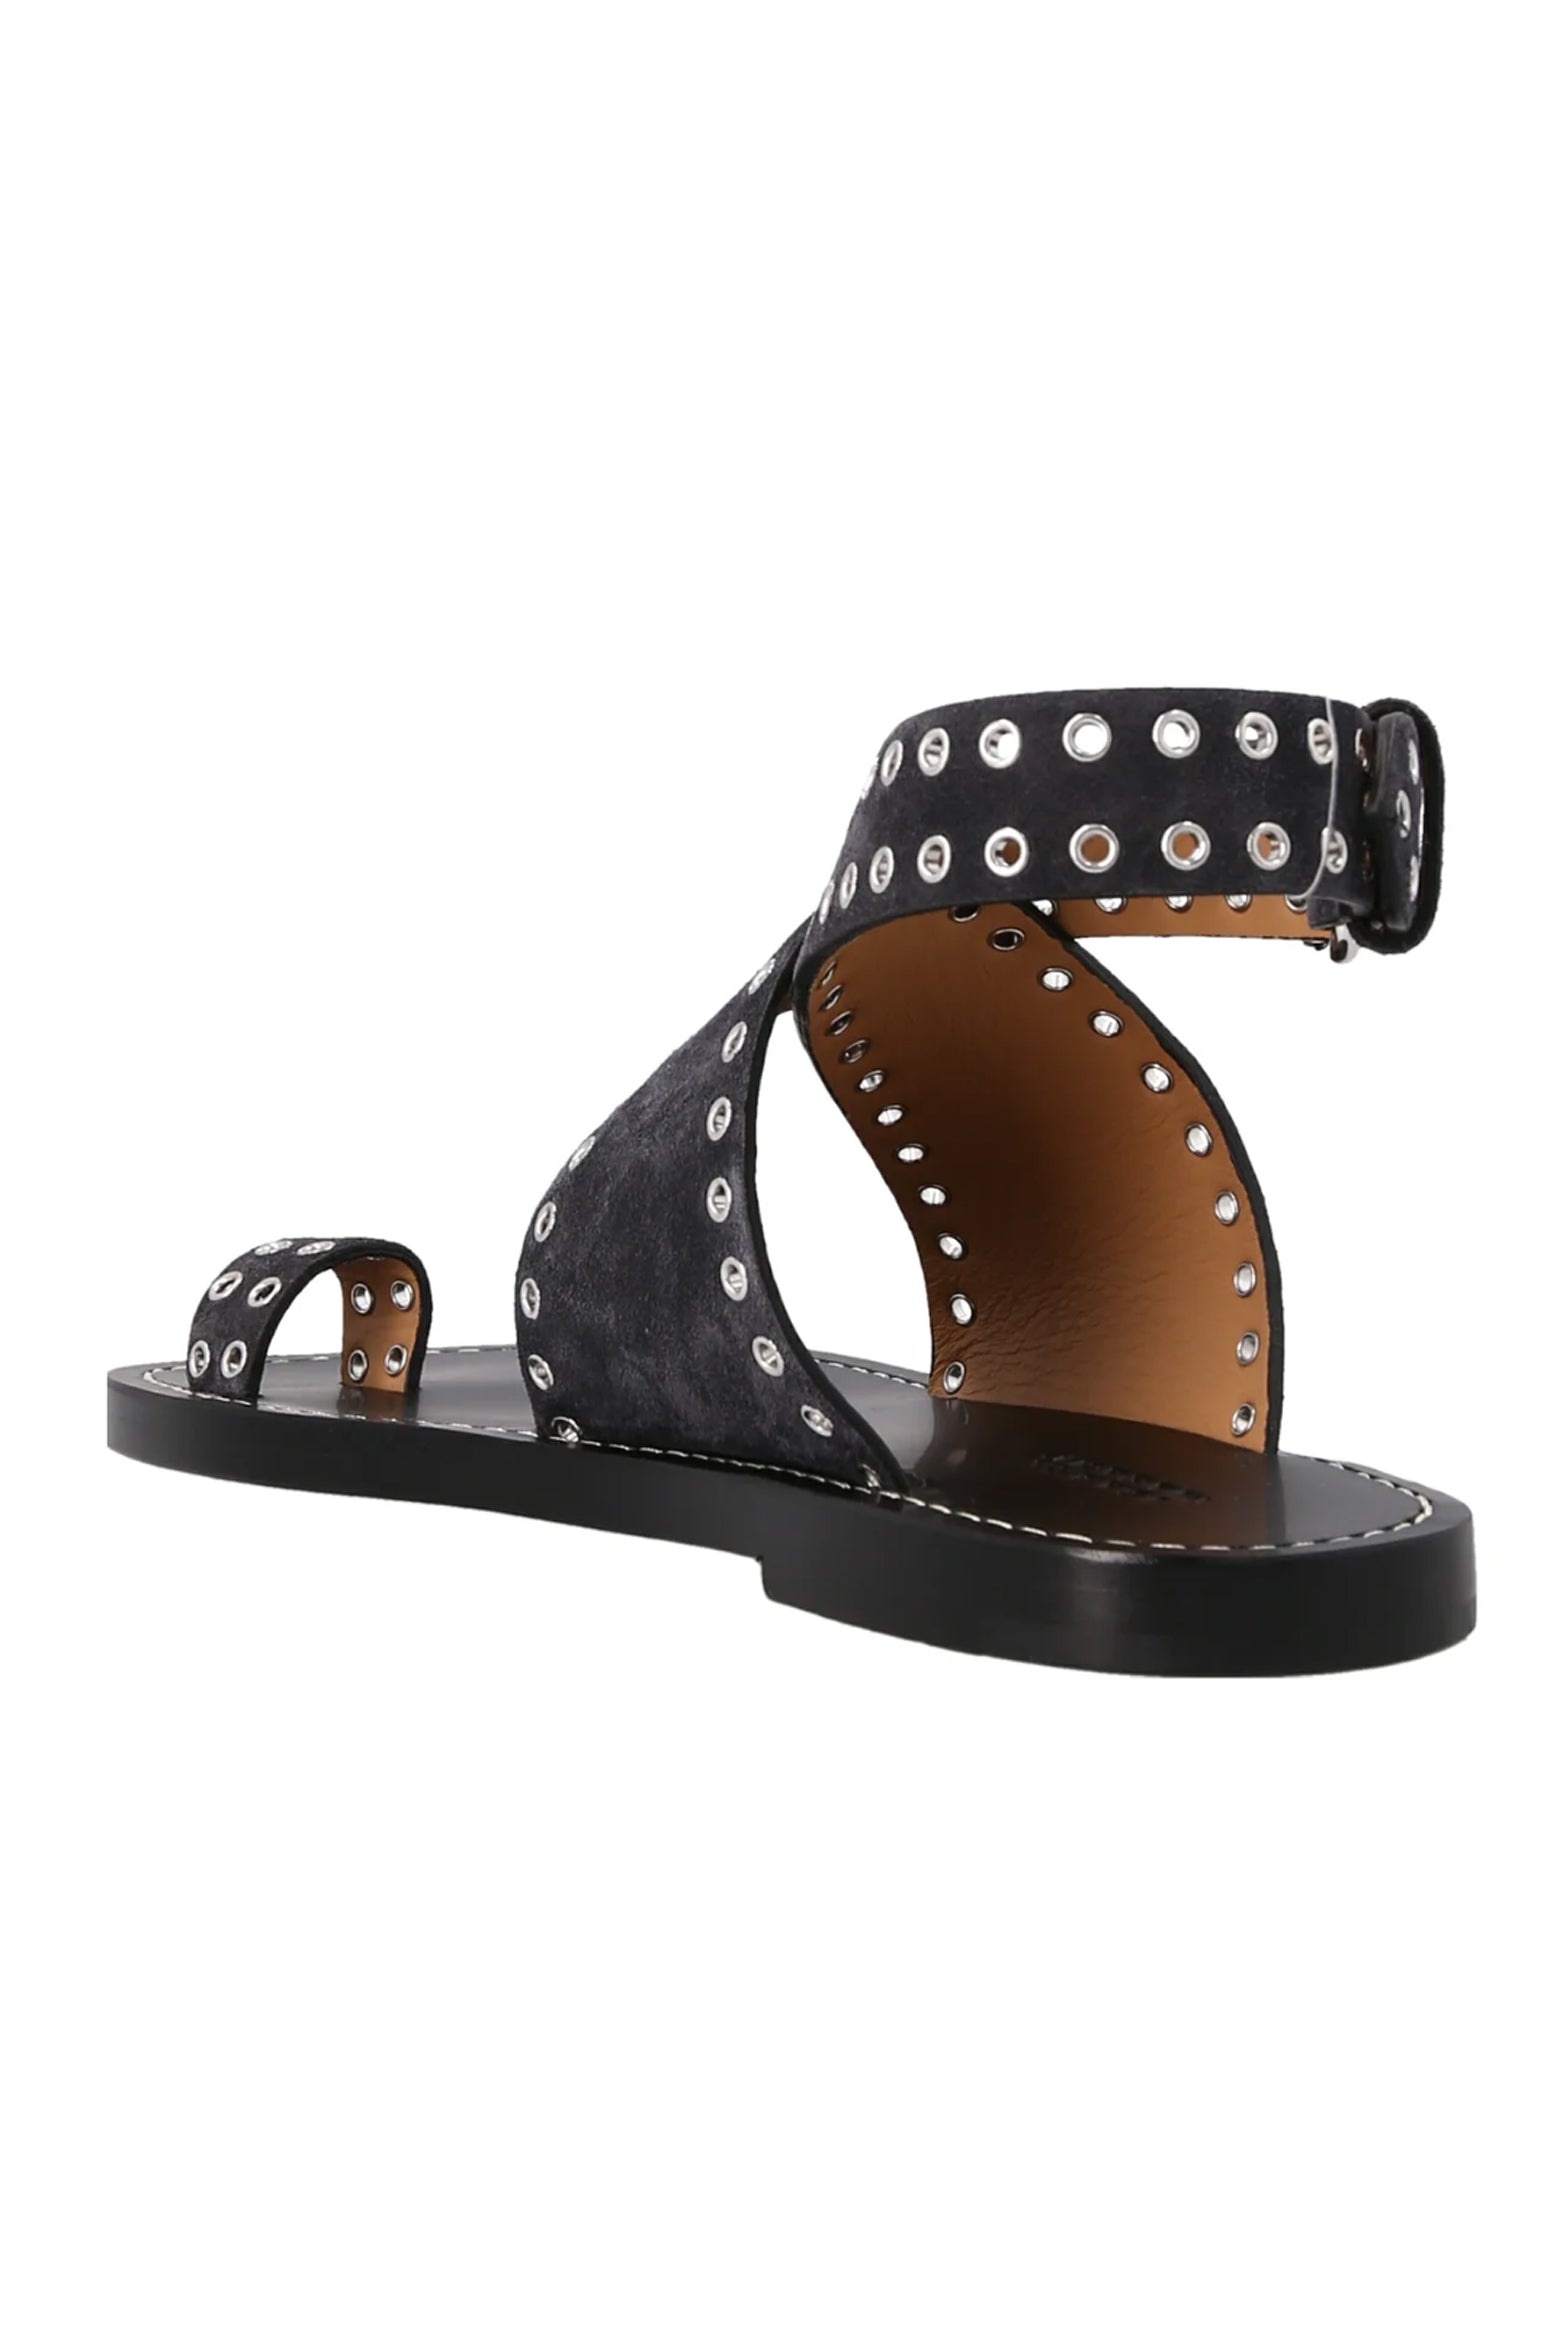 Isabel Marant Jools Sandals in Black Midnight from The New Trend